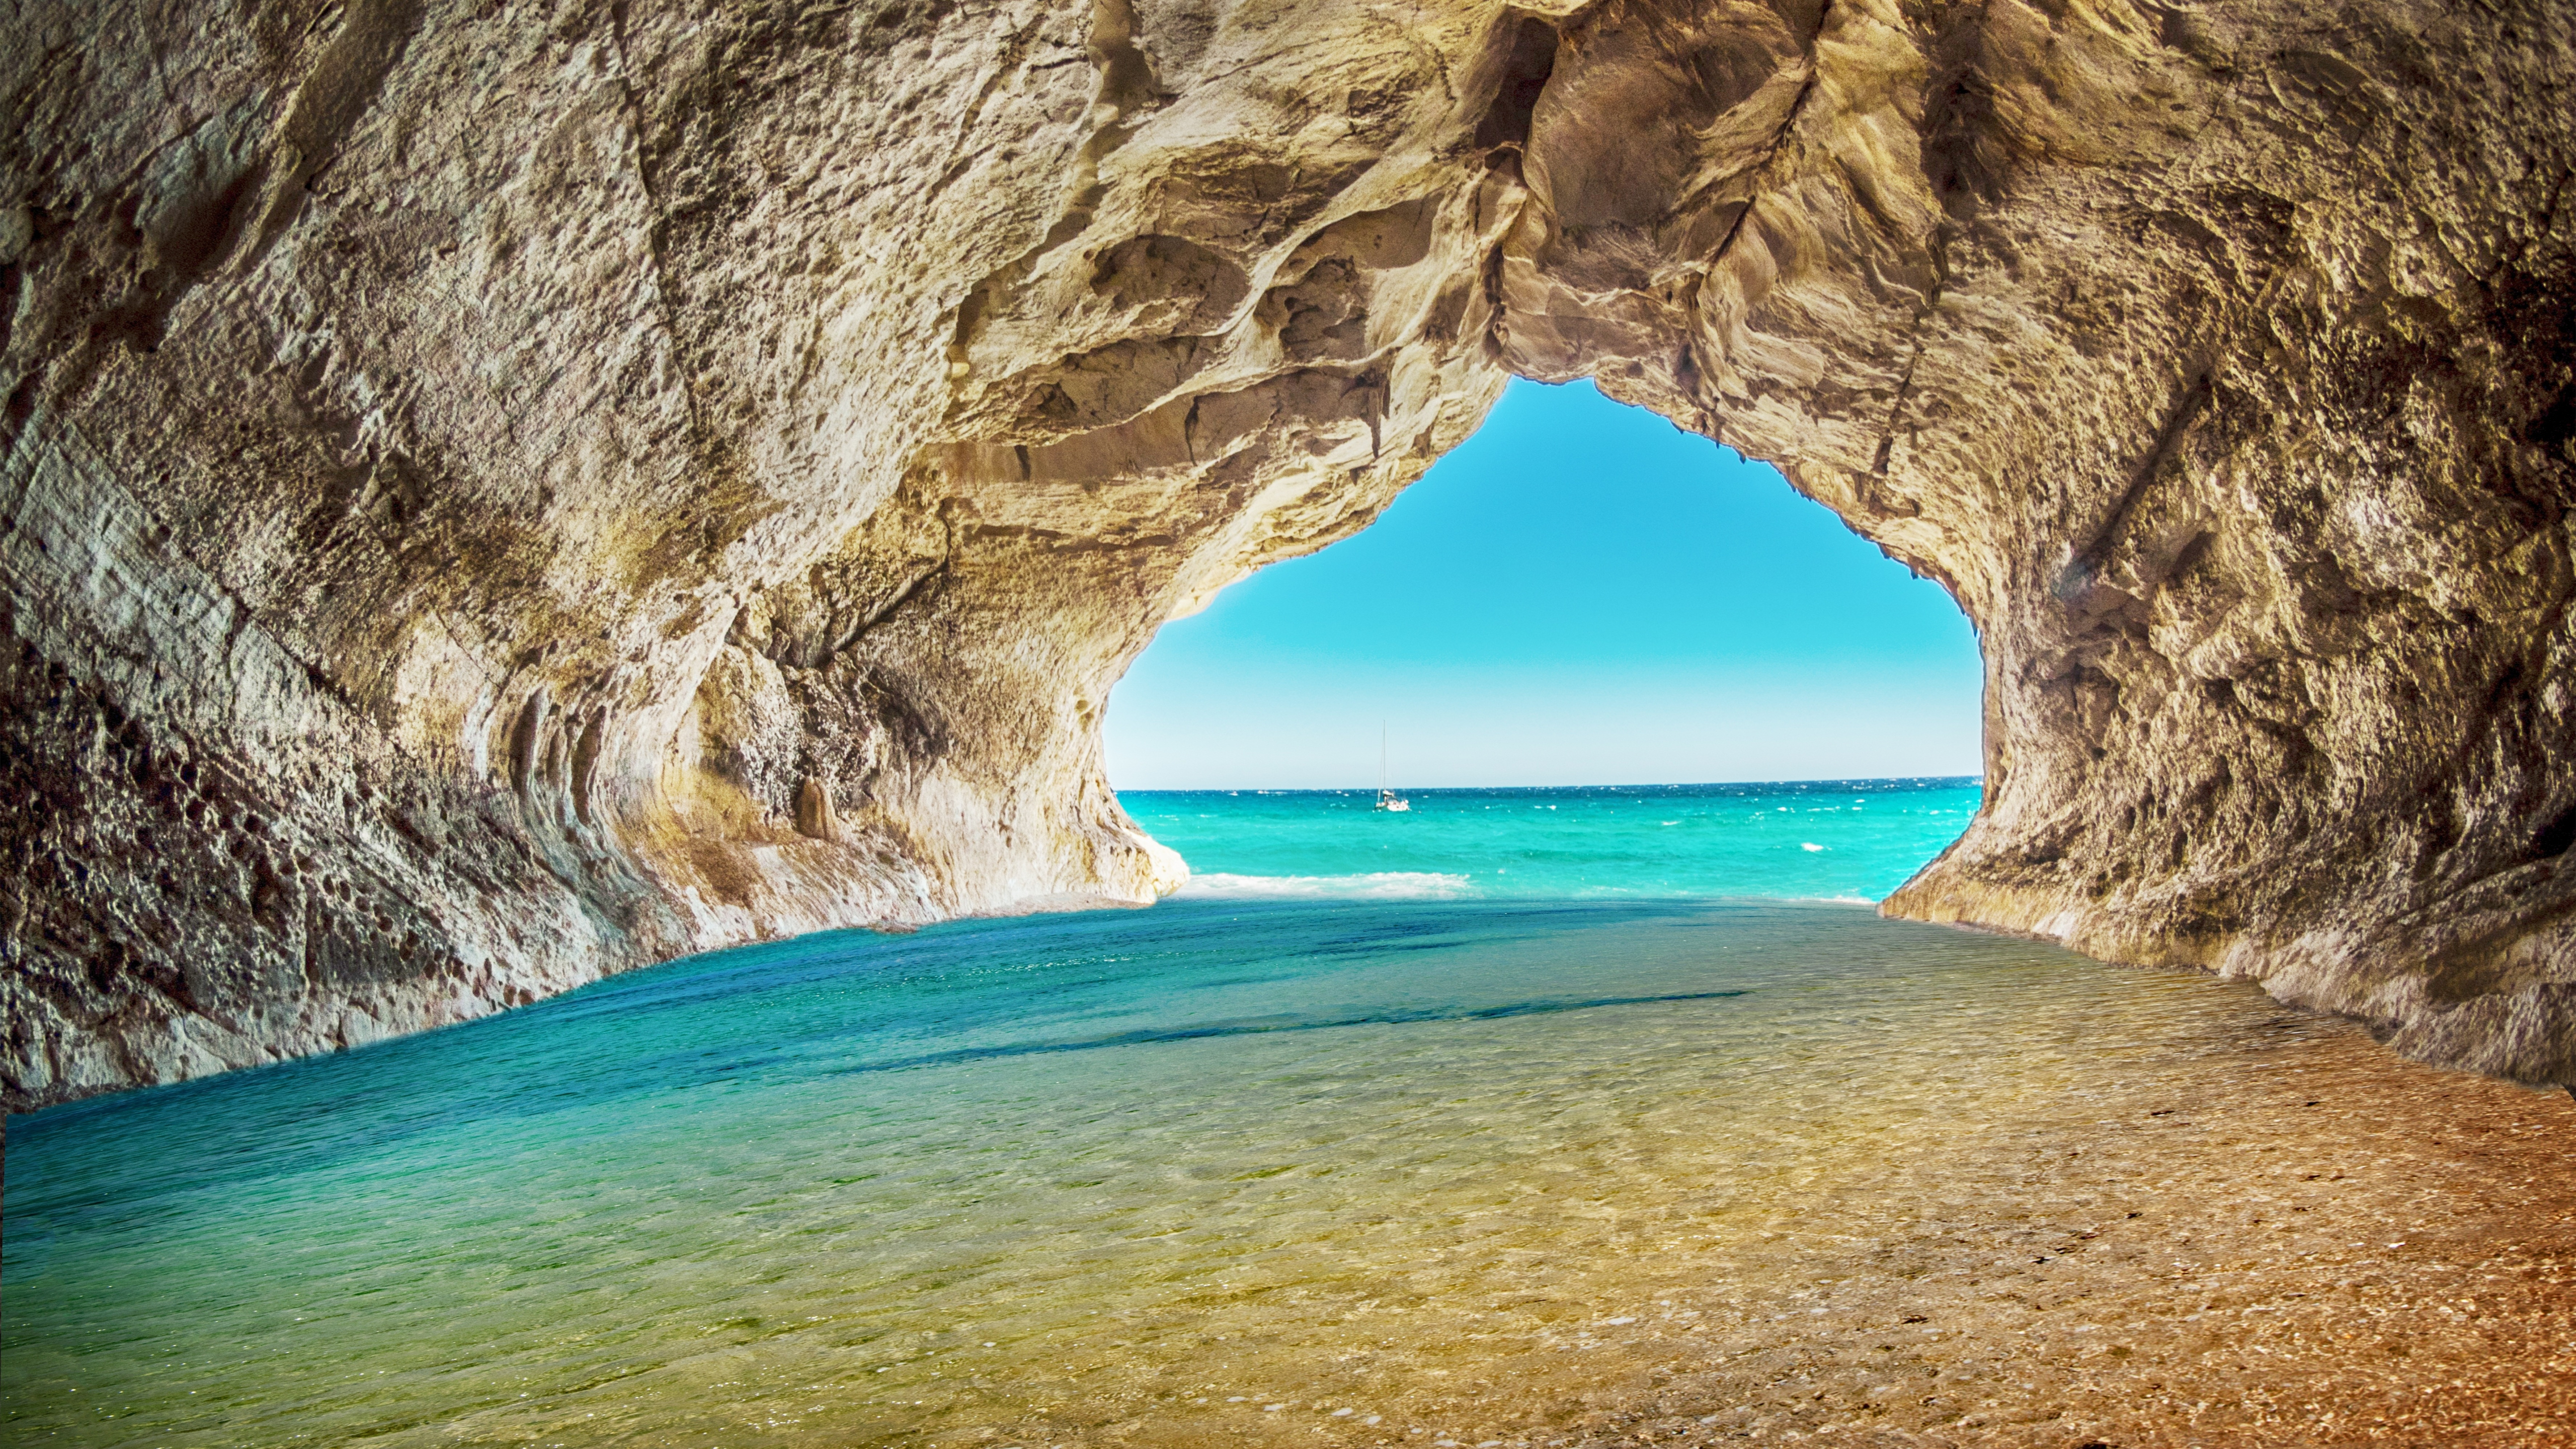 Download 5120x2880 wallpaper beach, sea, rock, arch, water, blue water, cave, 5k image, background, 19067